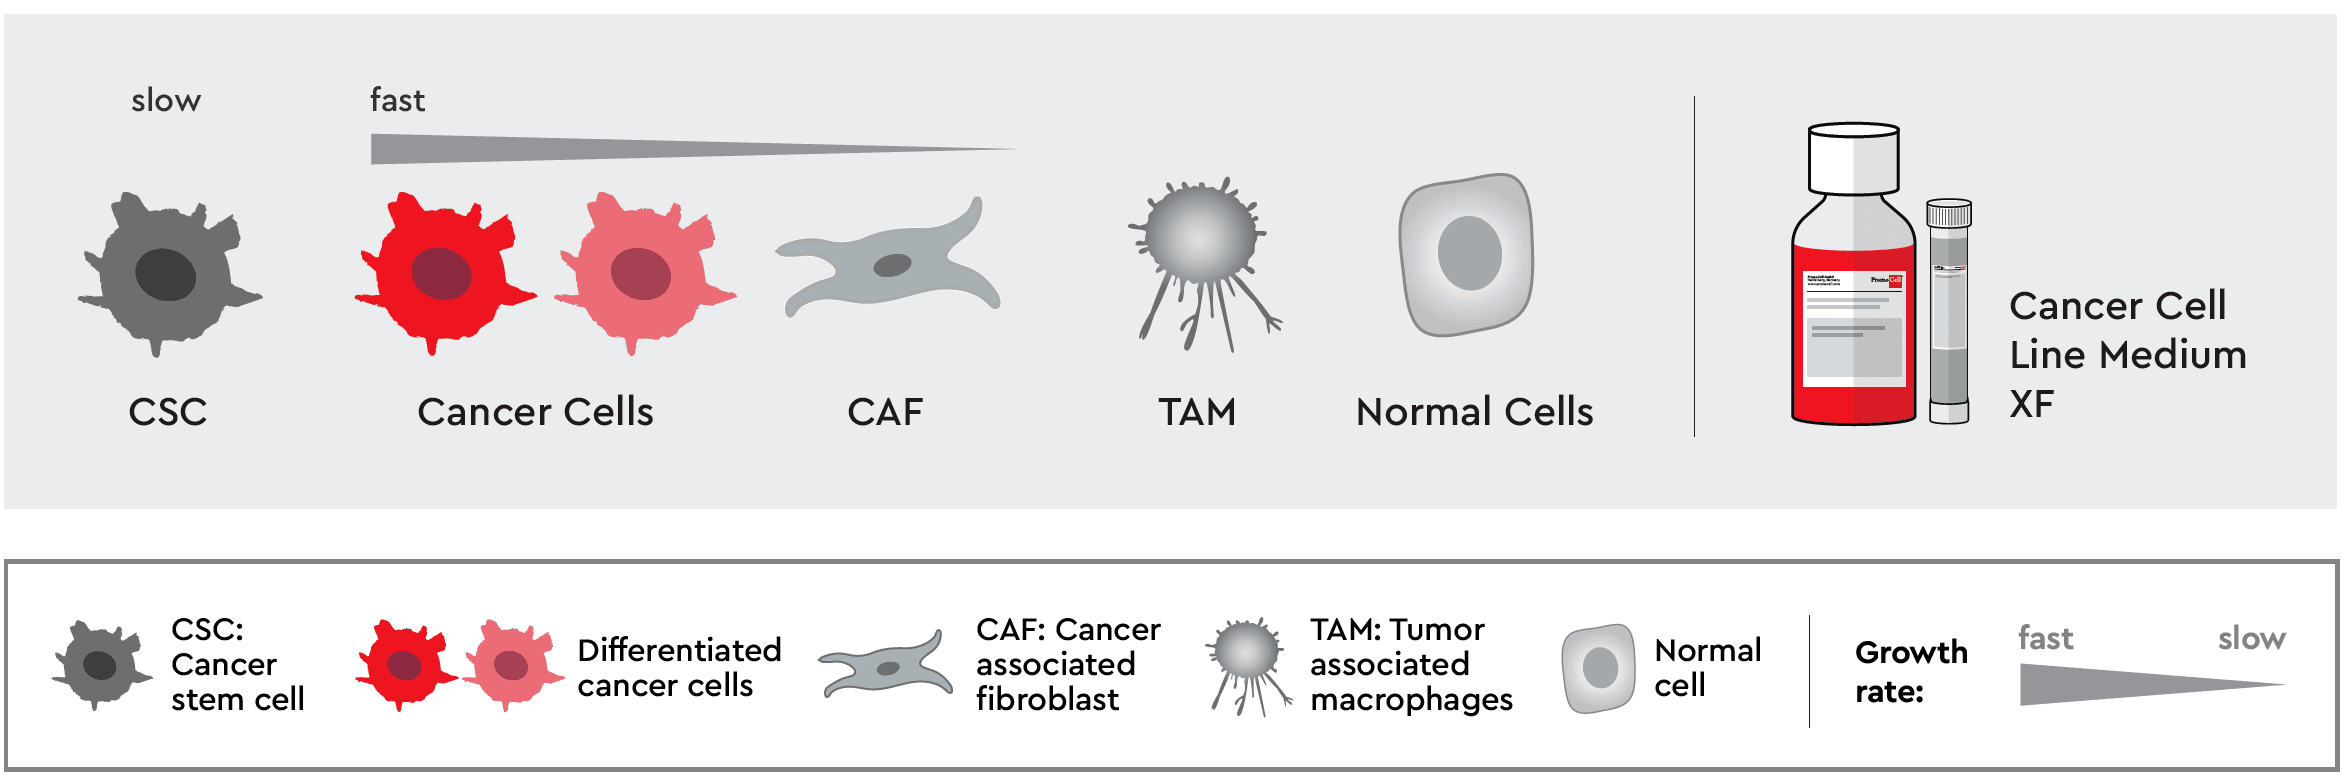 Cancer cell Line Medium XF In Cancer Media Tool Box